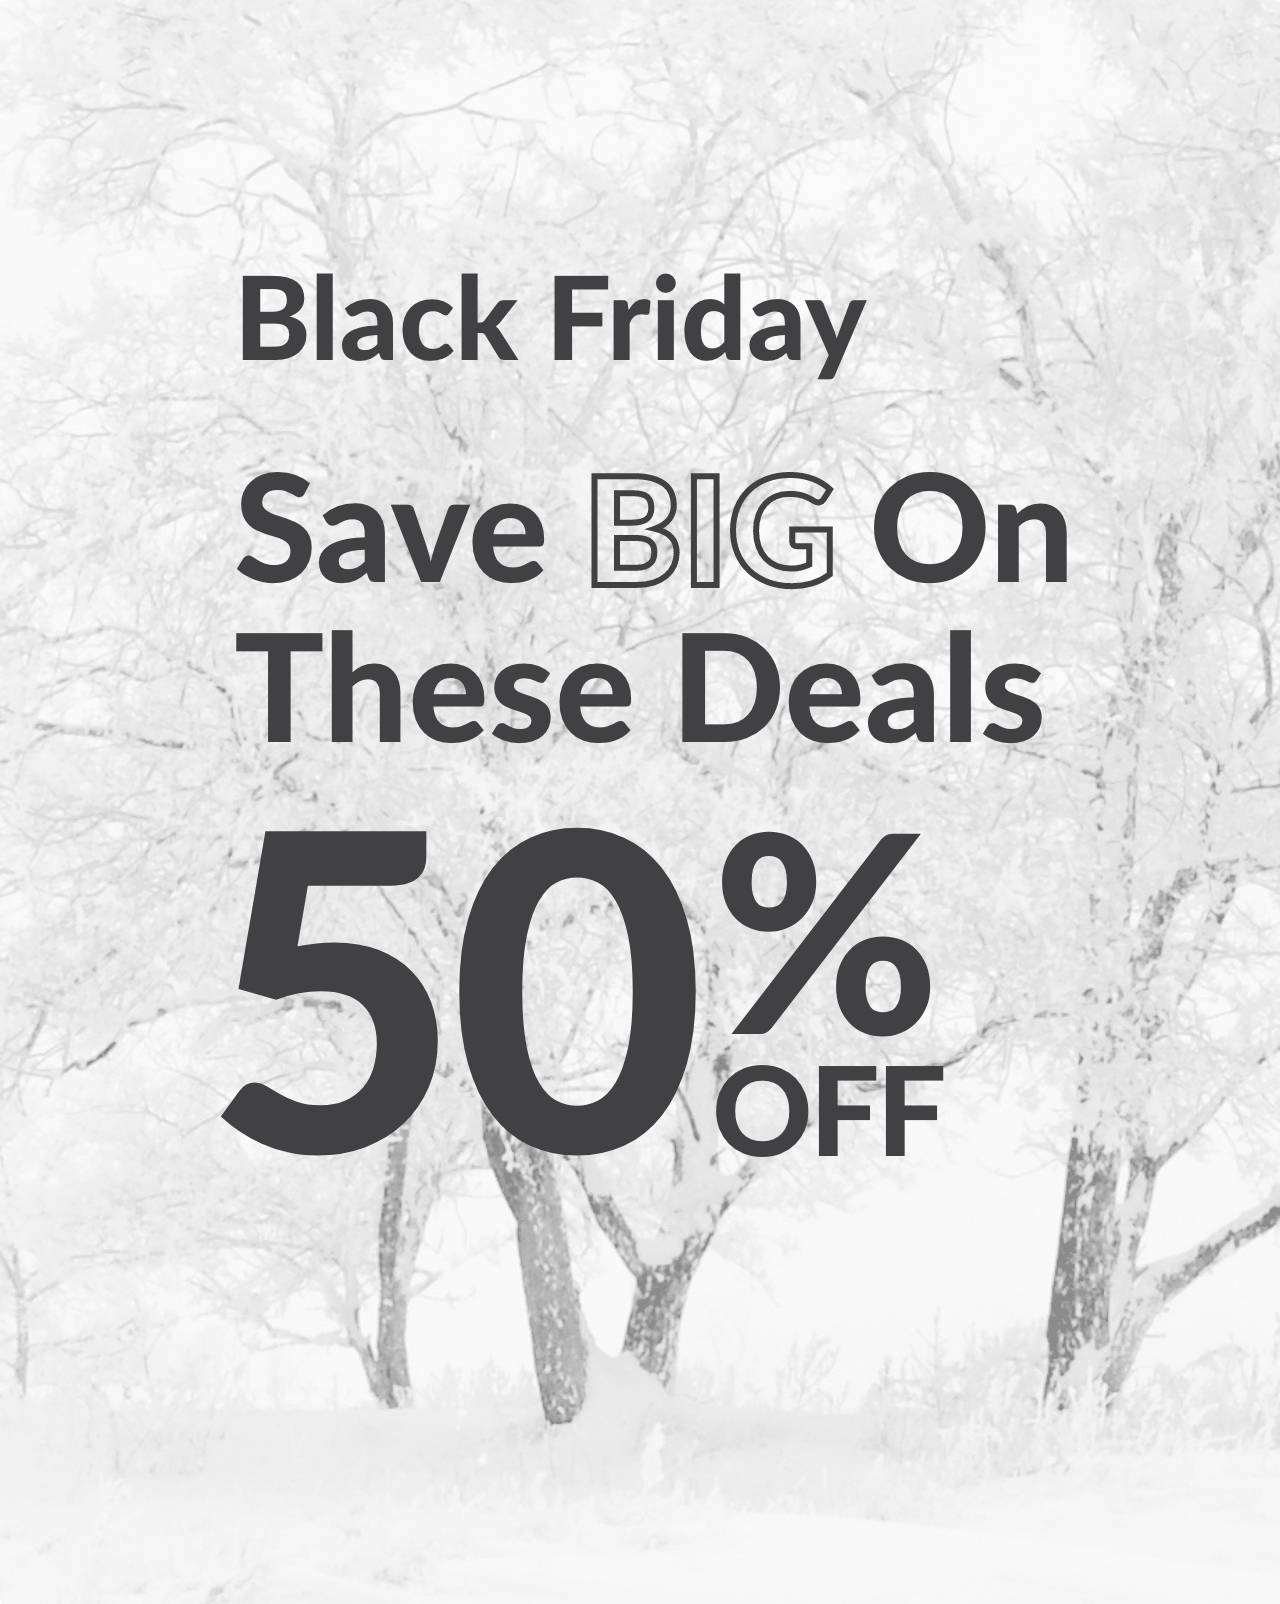 Black Friday Save BIG On These Deals 50% Off